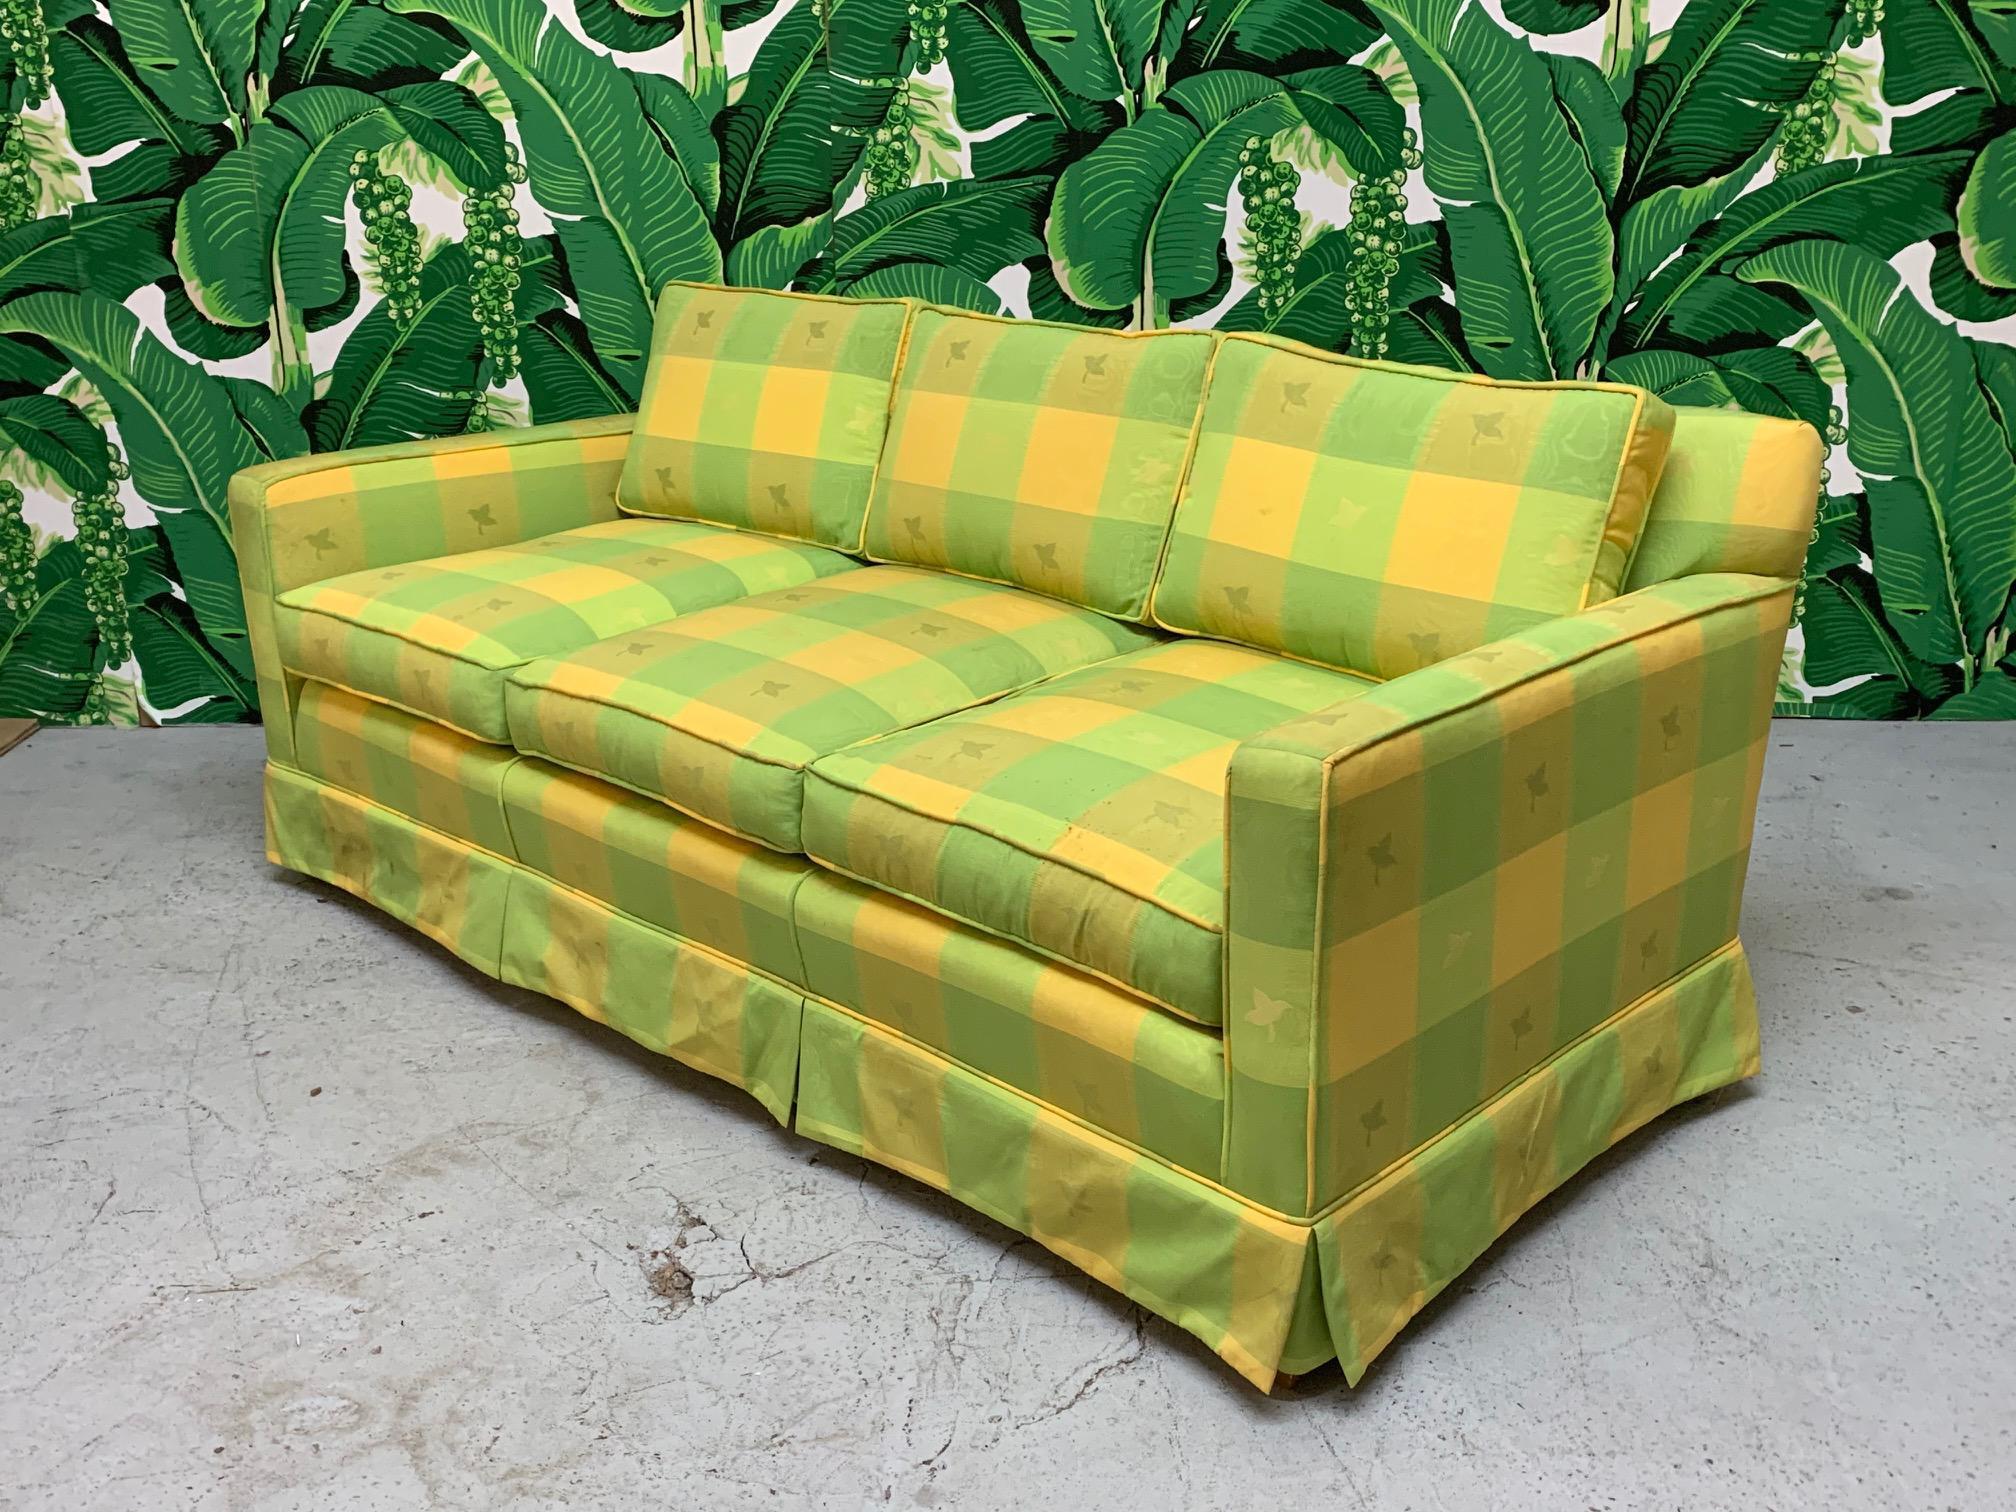 old plaid couch